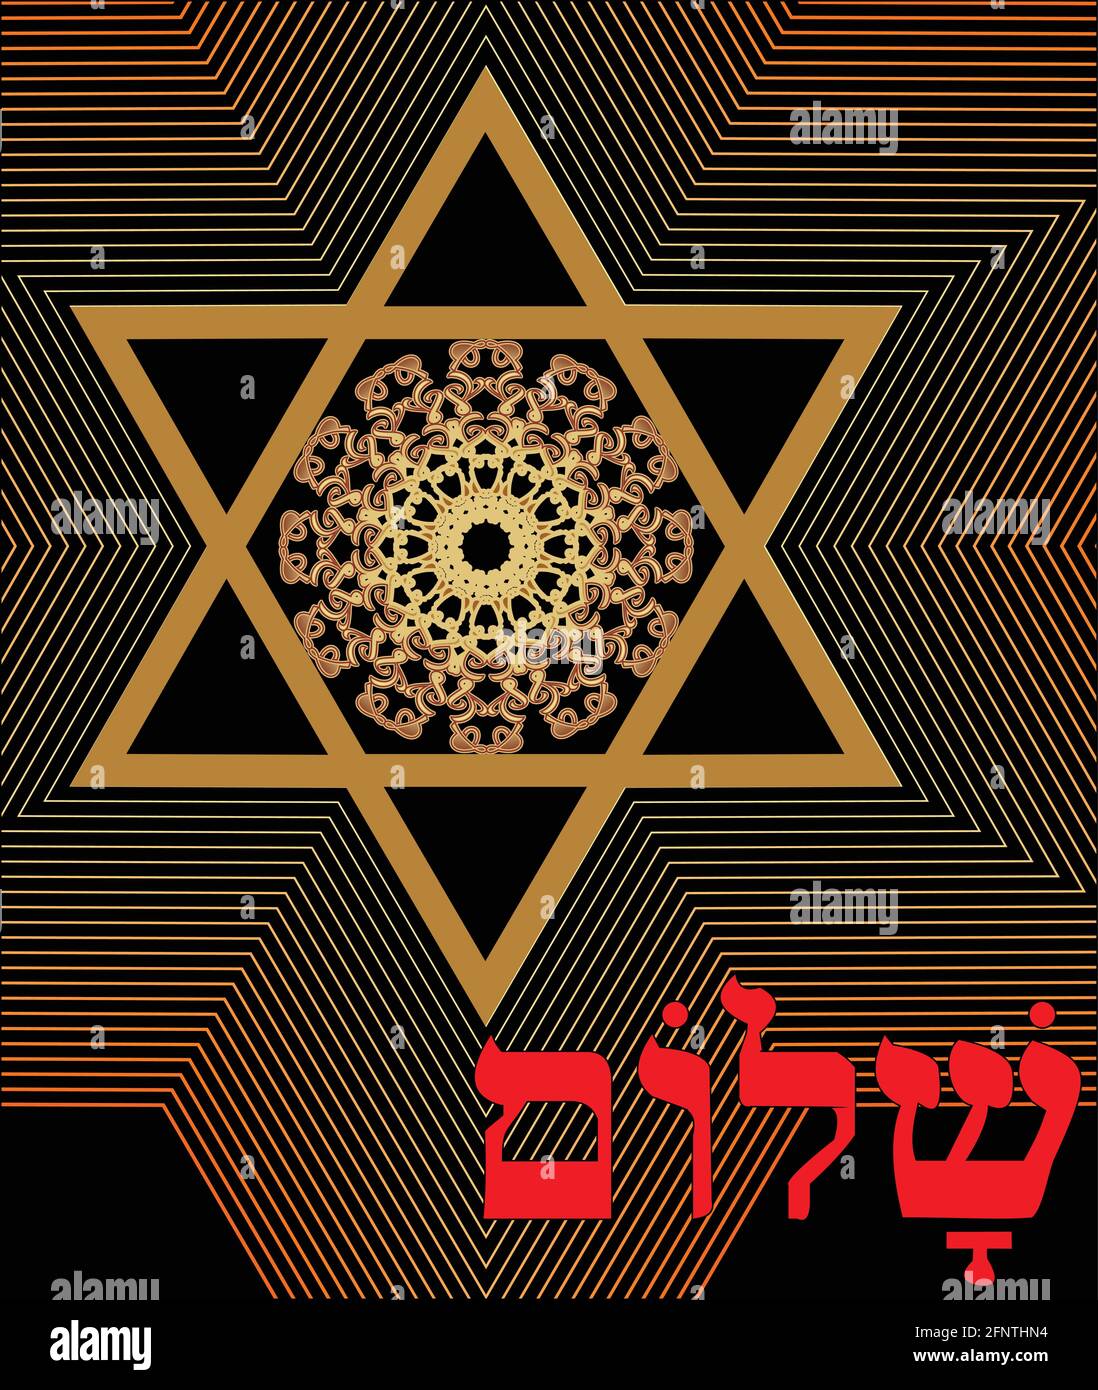 Star of David decoration tile with geometric vintage yew ornament in gold design, graphic outline effect, red inscription shalom eps10 vector Stock Vector